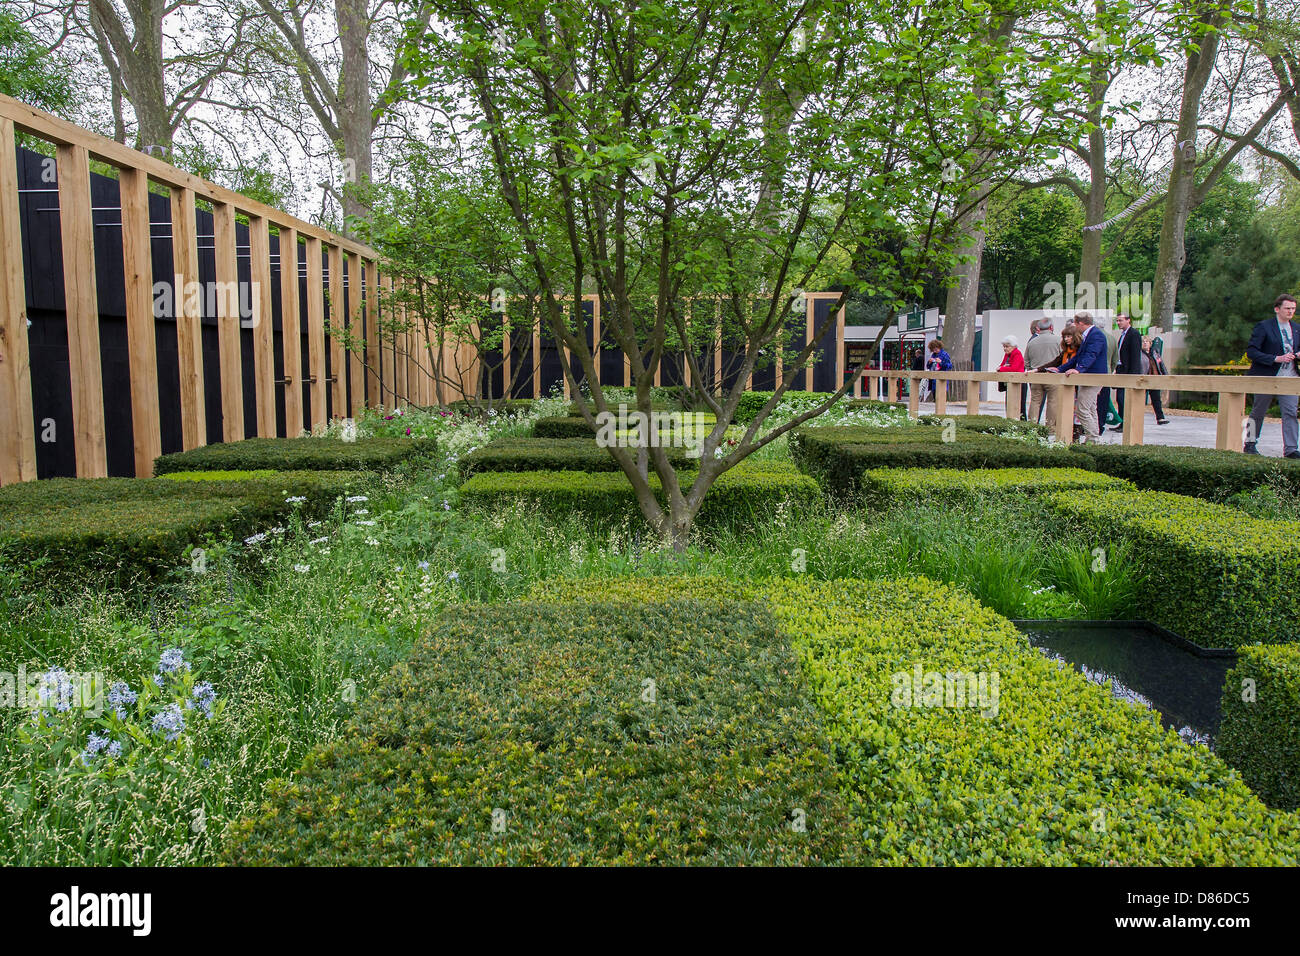 London, UK. 20th May 2013.The Daily Telegraph Garden. The first day of the Chelsea Flower Show. The Royal Hospital, Chelsea. Credit: Guy Bell/Alamy Live News Stock Photo